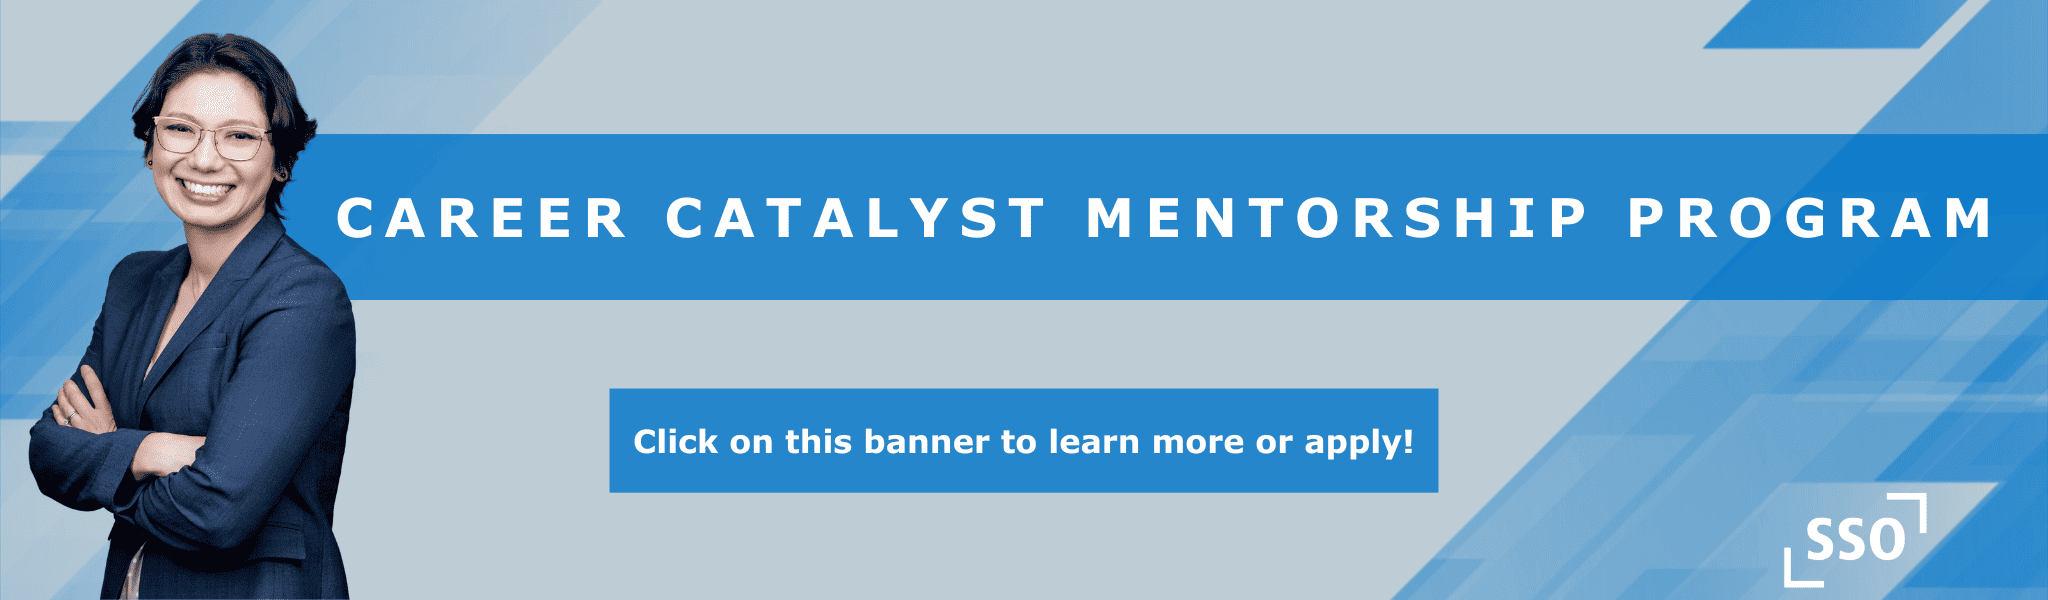 Career Catalyst Mentorship Program Web Banner Home and About